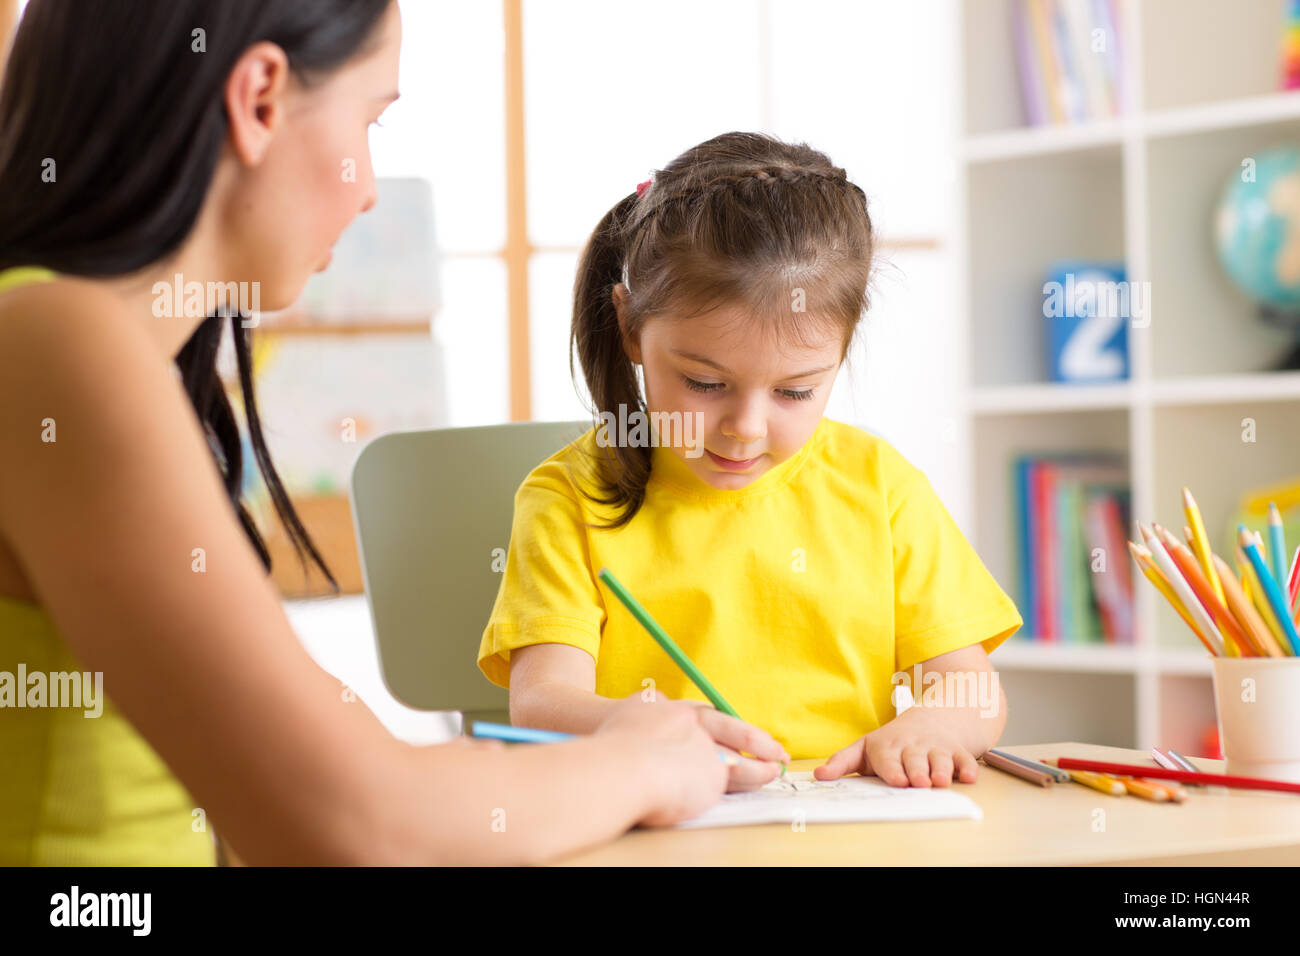 Woman teaching kid to write. Elementary pupil painting with teacher Stock Photo